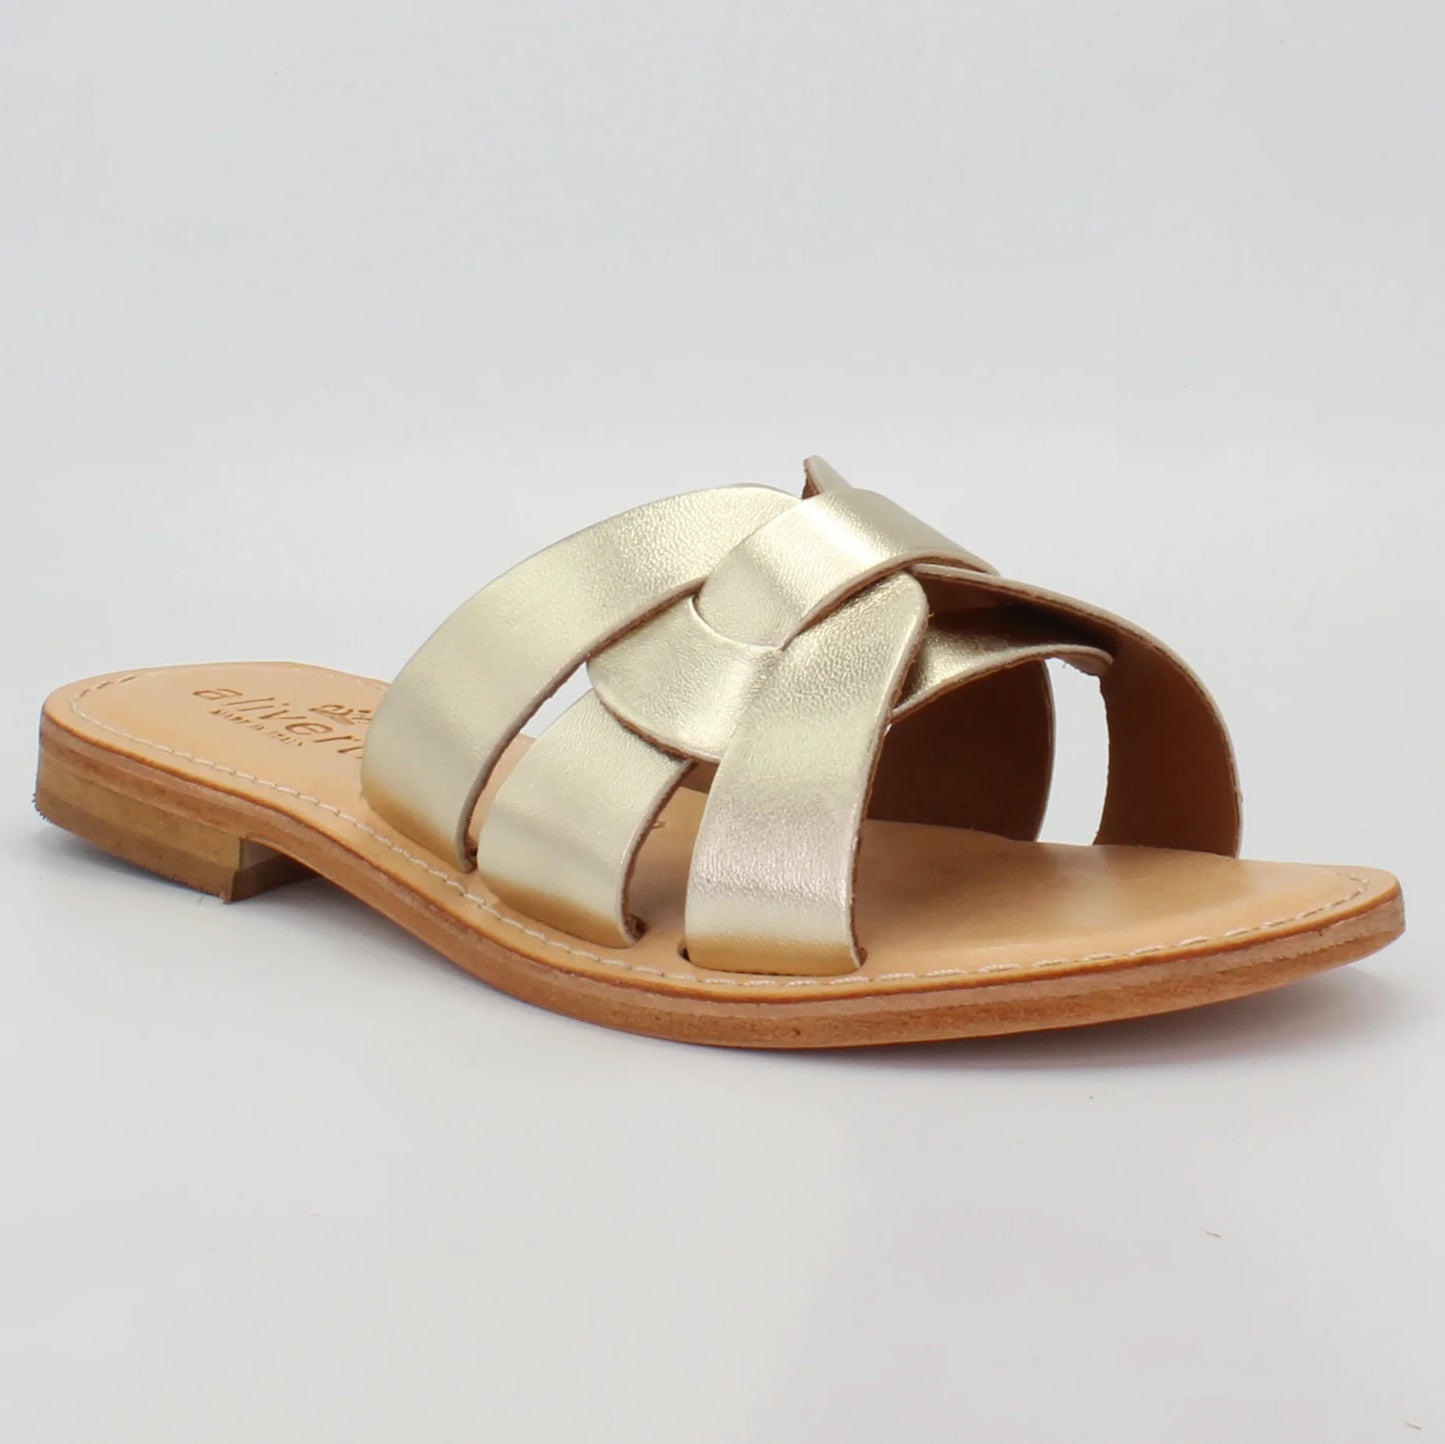 Shop Handmade Italian Leather sandal in platinum (1801) or browse our range of hand-made Italian shoes in leather or suede in-store at Aliverti Cape Town, or shop online. We deliver in South Africa & offer multiple payment plans as well as accept multiple safe & secure payment methods.